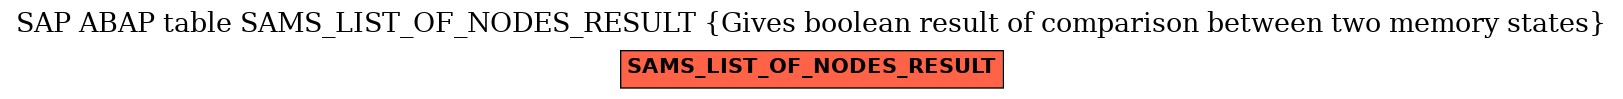 E-R Diagram for table SAMS_LIST_OF_NODES_RESULT (Gives boolean result of comparison between two memory states)